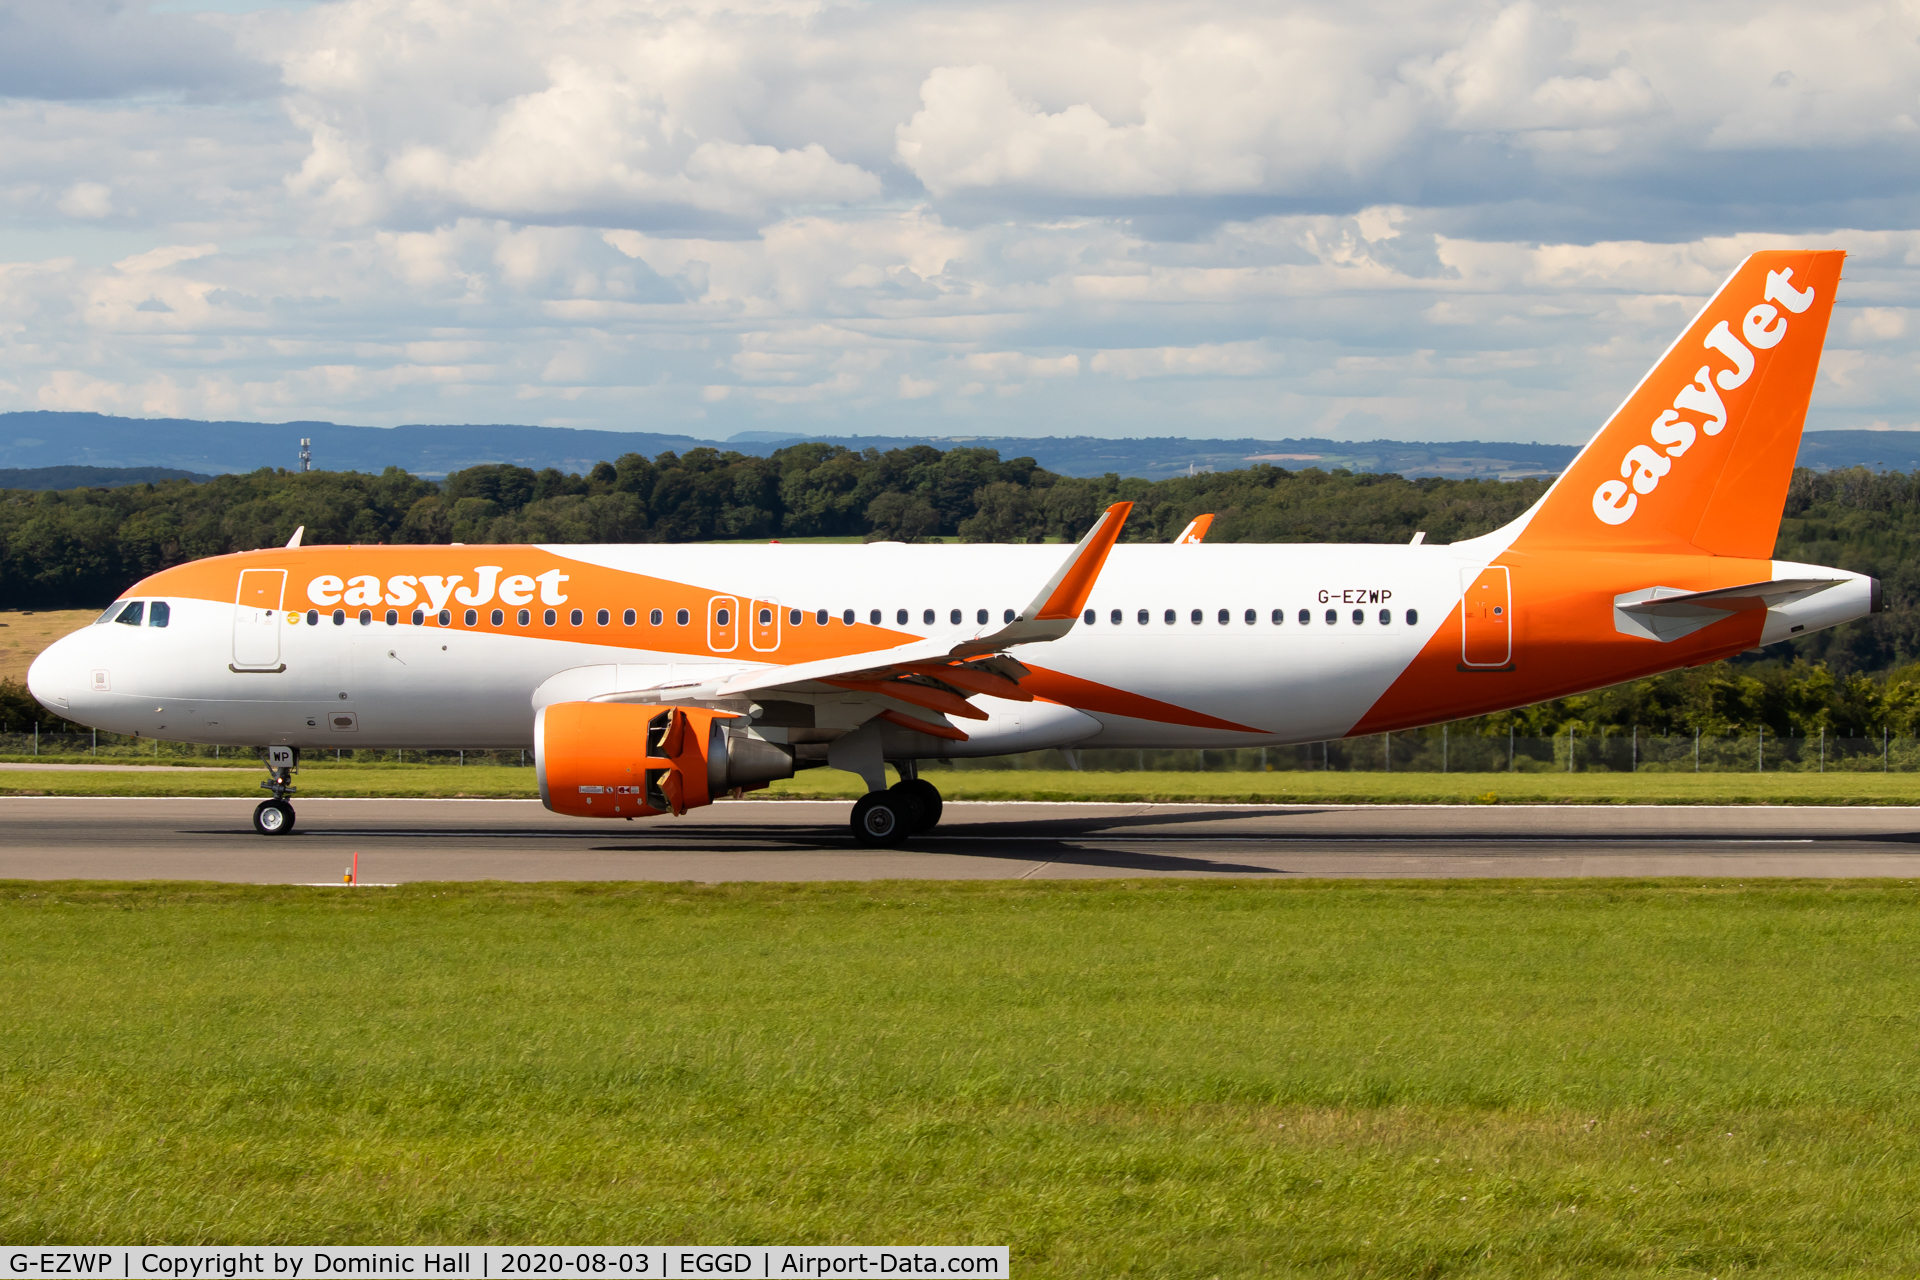 G-EZWP, 2013 Airbus A320-214 C/N 5927, BRS 03-08-20